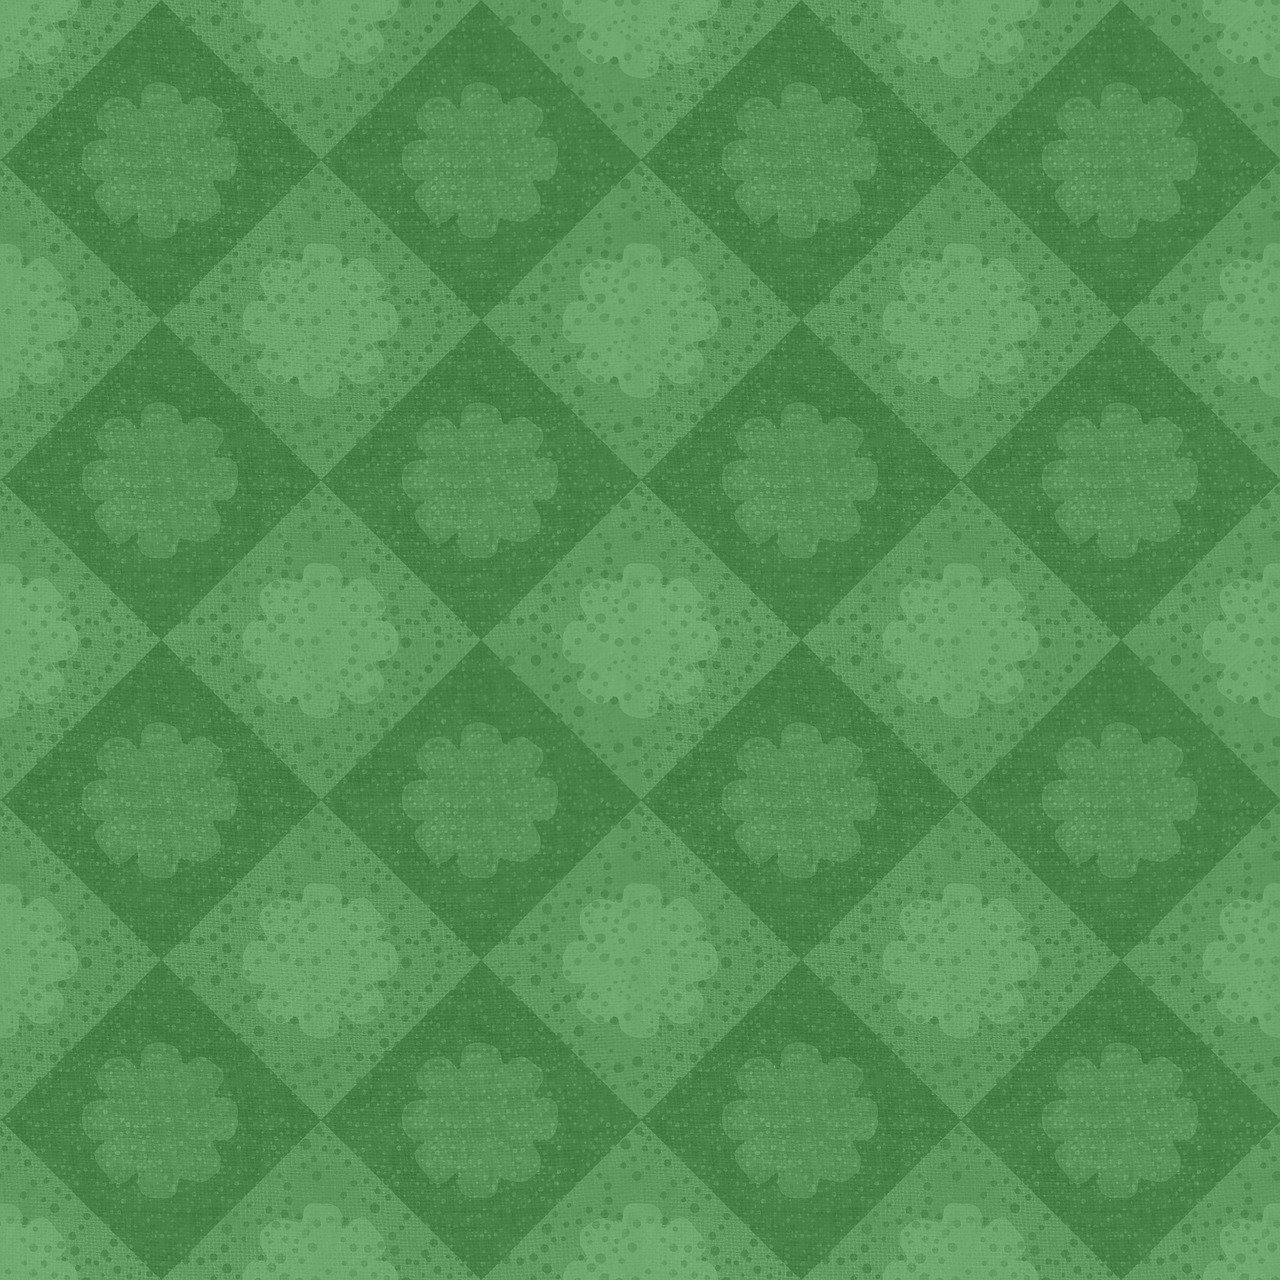 a pattern of four leaf clovers on a green background, inspired by Art Green, diamond texture, tiled room squared waterway, subtle lovecraftian vibes, low quality photo